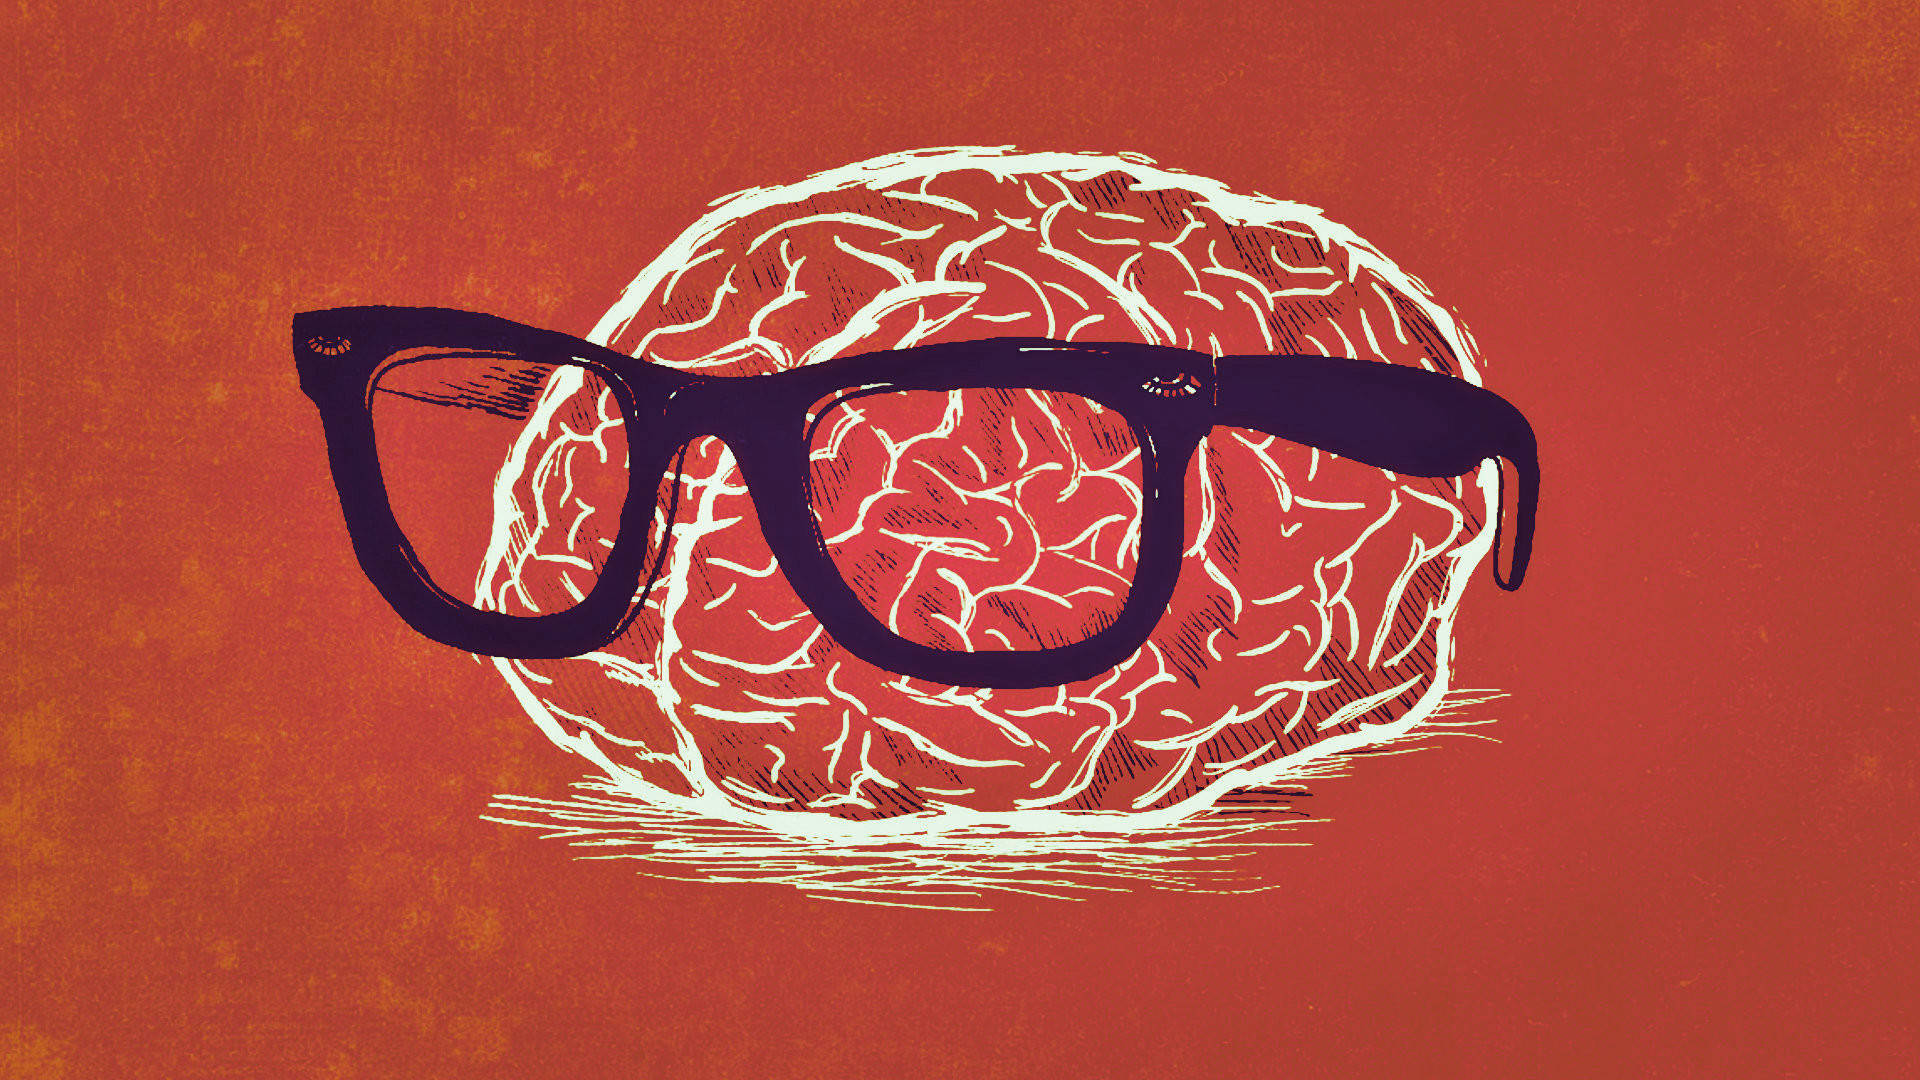 Nerd Brain With Glasses Background